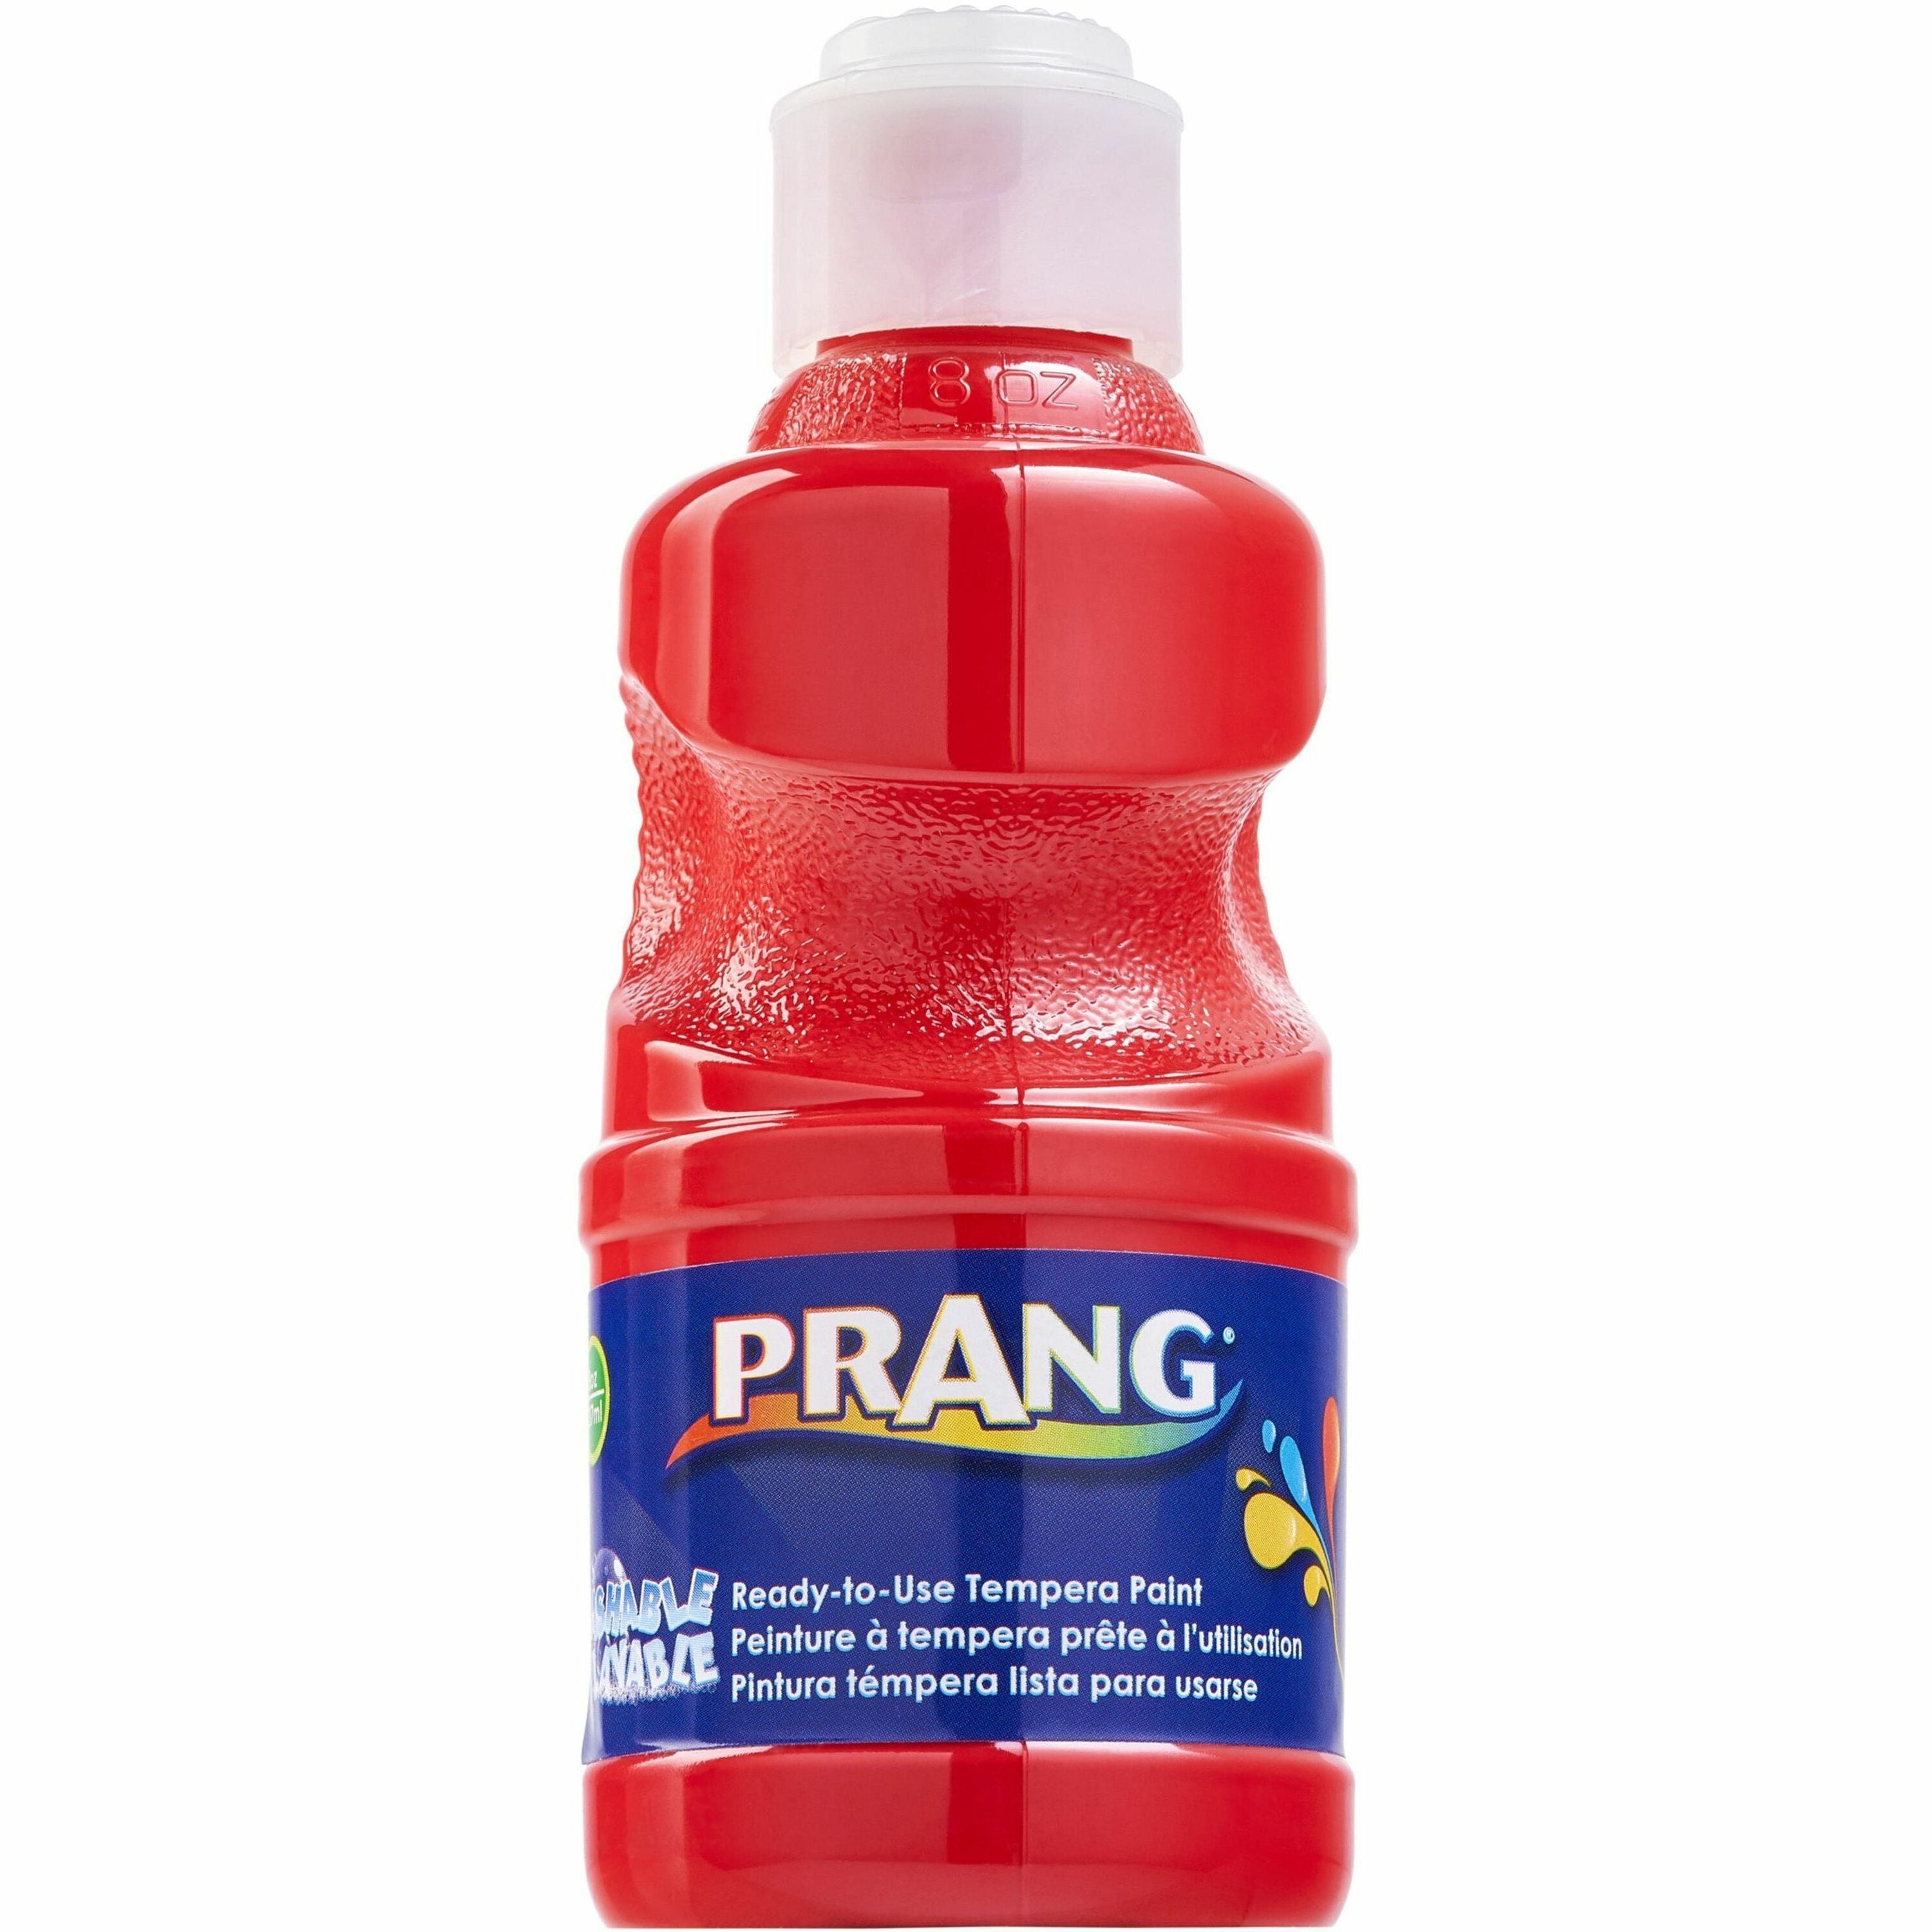 prang-ready-to-use-washable-tempera-paint-8-fl-oz-1-each-red_dixx10801 - 1